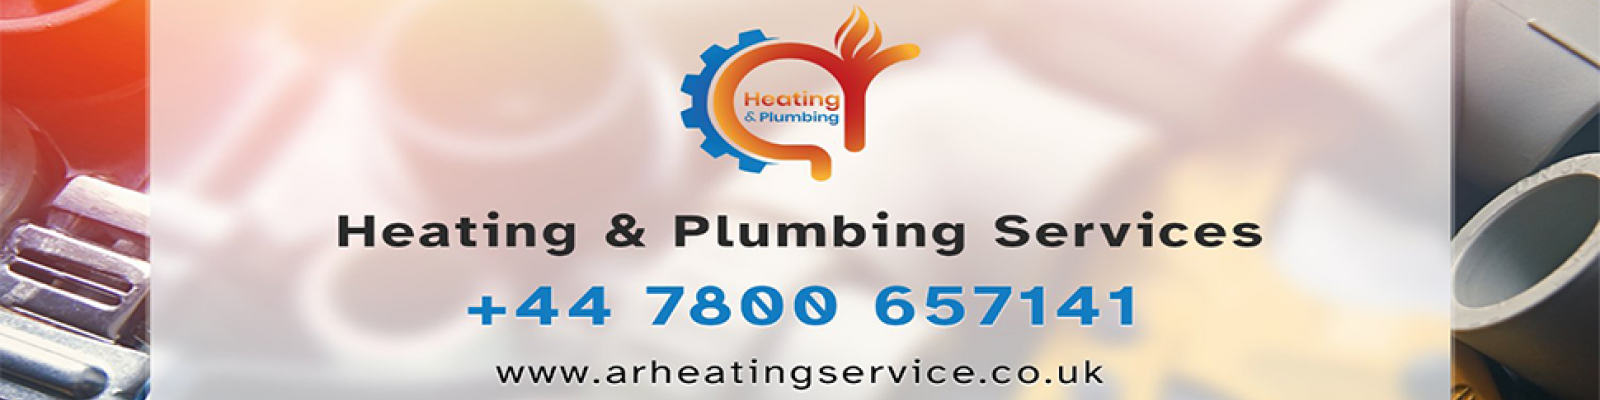 AR Heating Service provides heating and plumbing services.